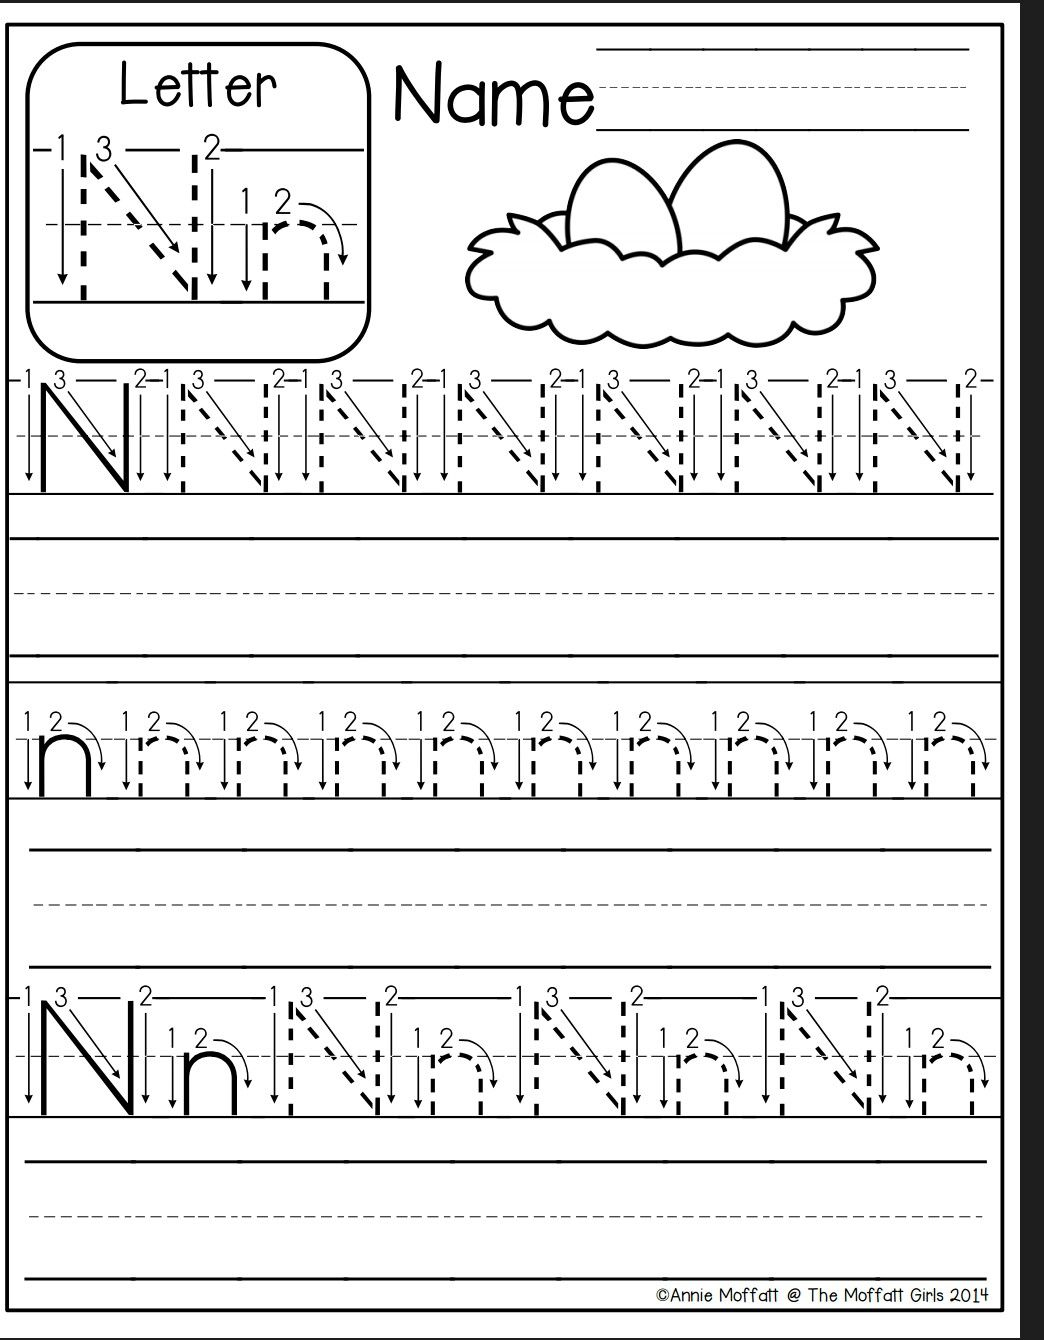 Math Worksheet : Preschool Writing Pages Letter N Worksheet in N Letter Worksheets